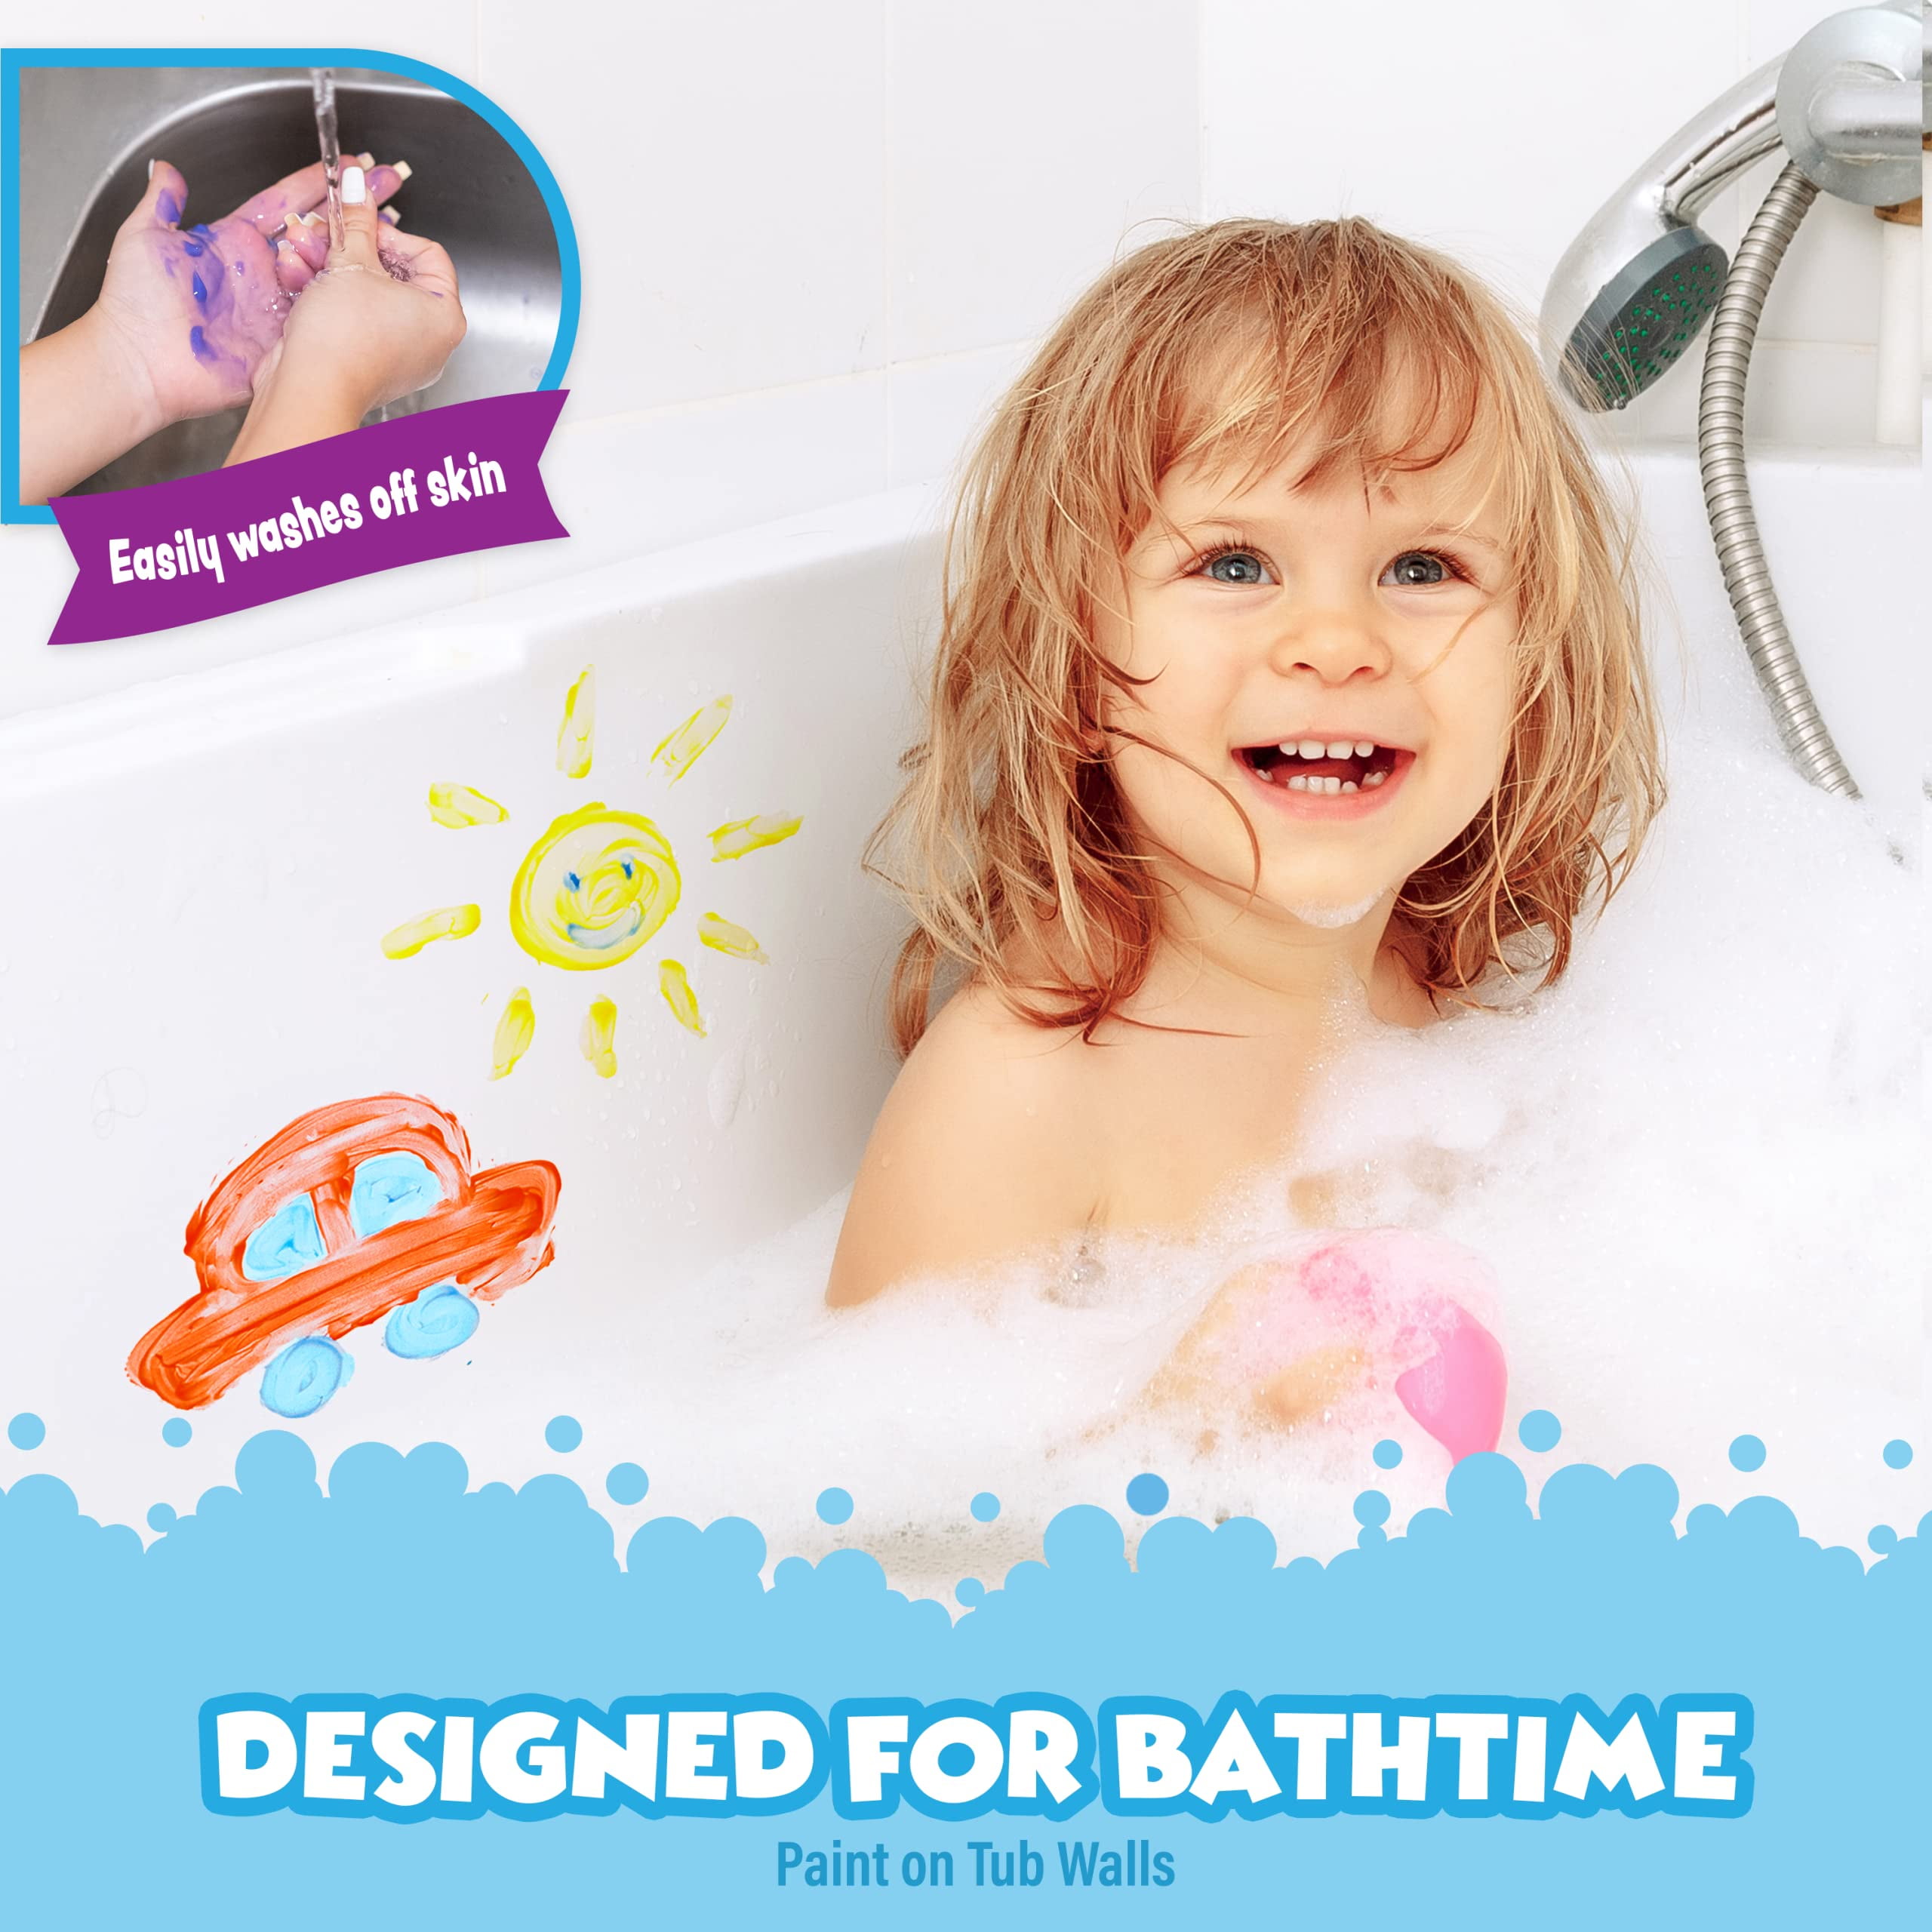 Tub Works Bathtub Finger Paint Soap, Fun Colors 6 Pack, Non-Toxic, Washable Bathtub Paint for Finger Painting on Tub Walls, Ideal Toddler Bath  Toys for Creative Play